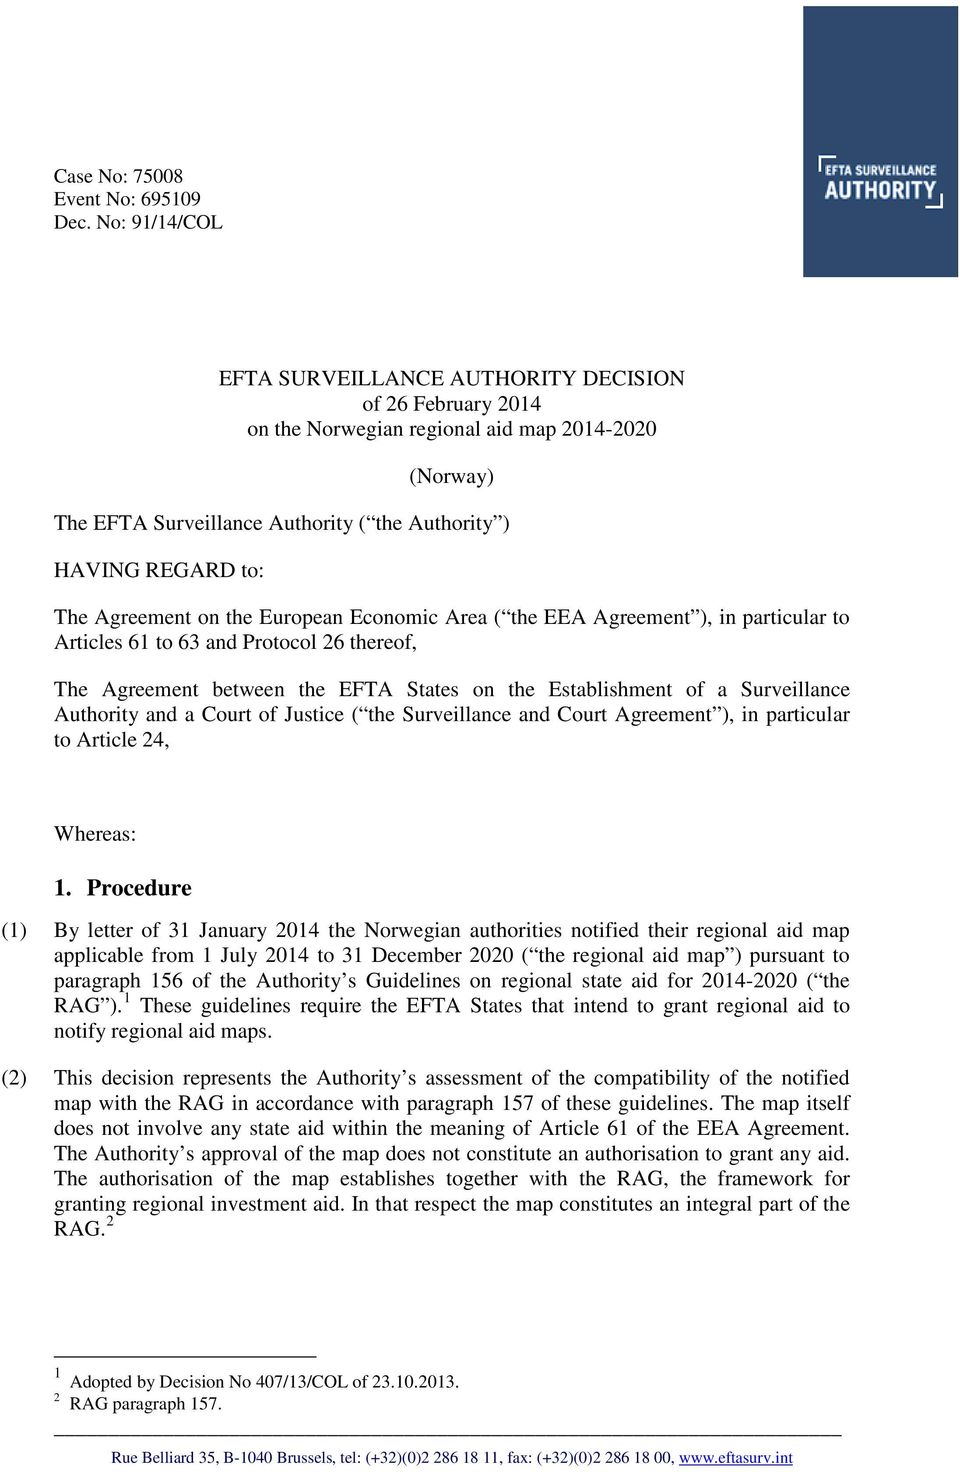 Agreement on the European Economic Area ( the EEA Agreement ), in particular to Articles 61 to 63 and Protocol 26 thereof, The Agreement between the EFTA States on the Establishment of a Surveillance